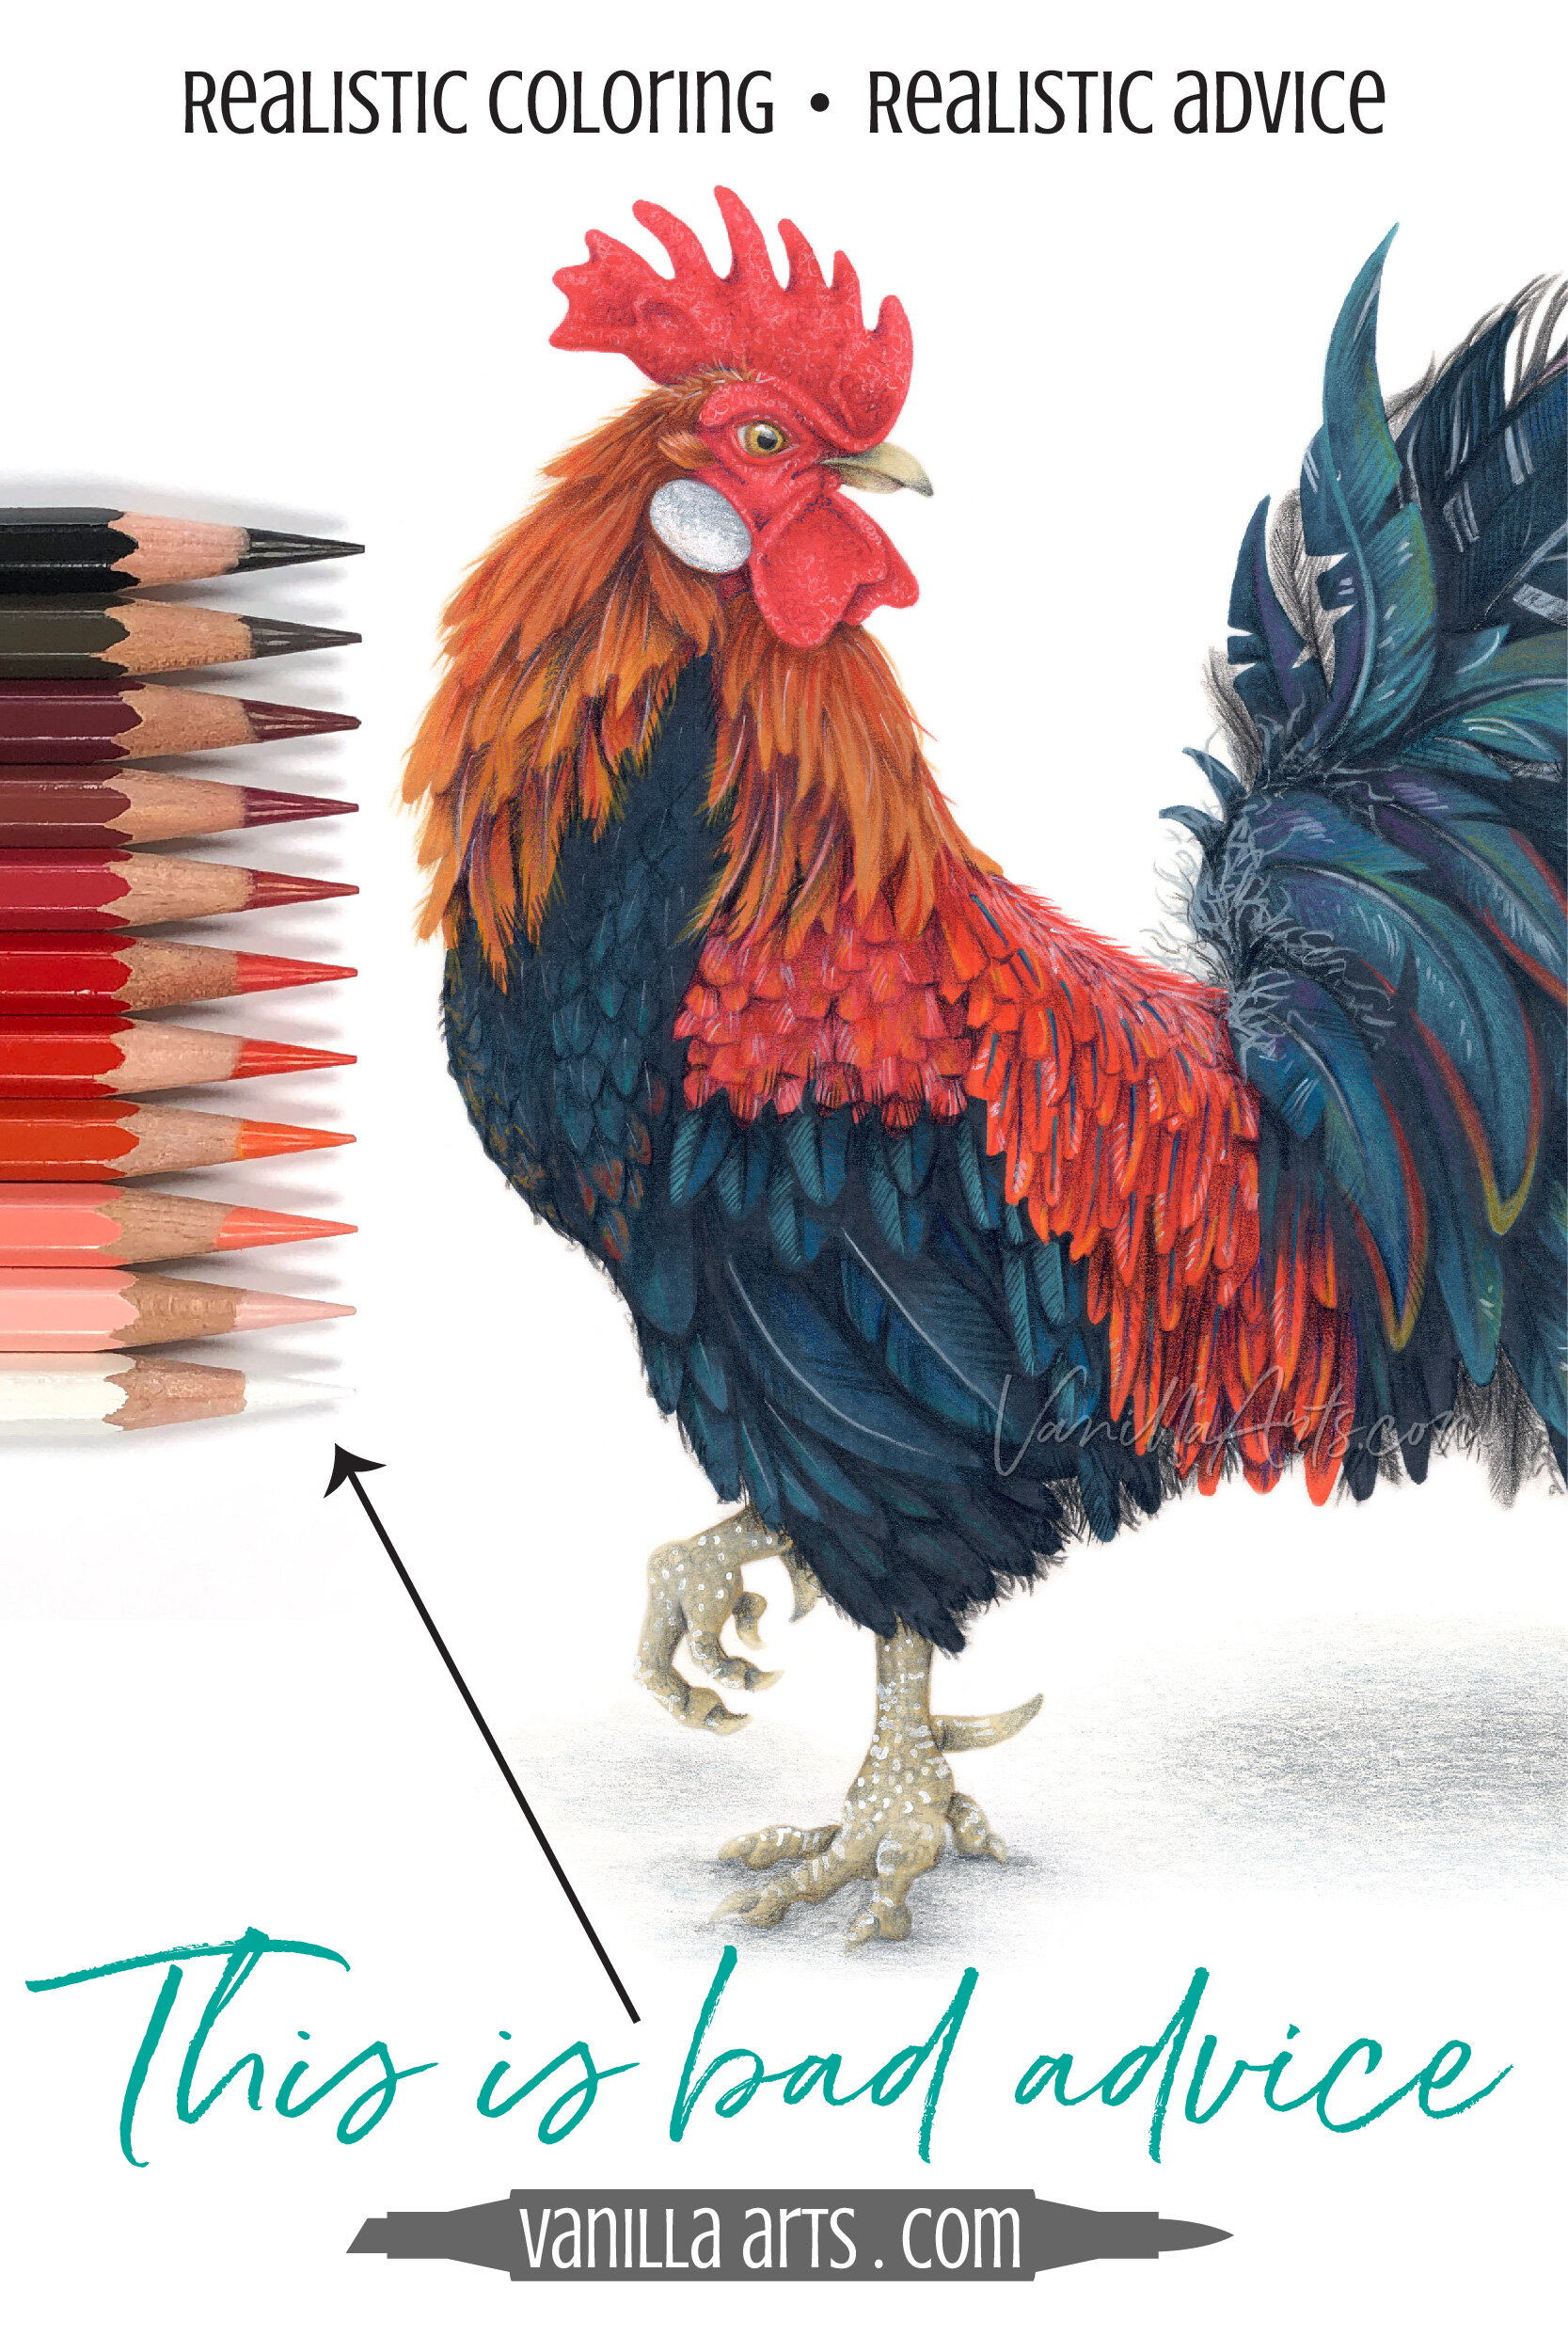 Layering Coloured Pencils: Tips for Achieving Stunning Results